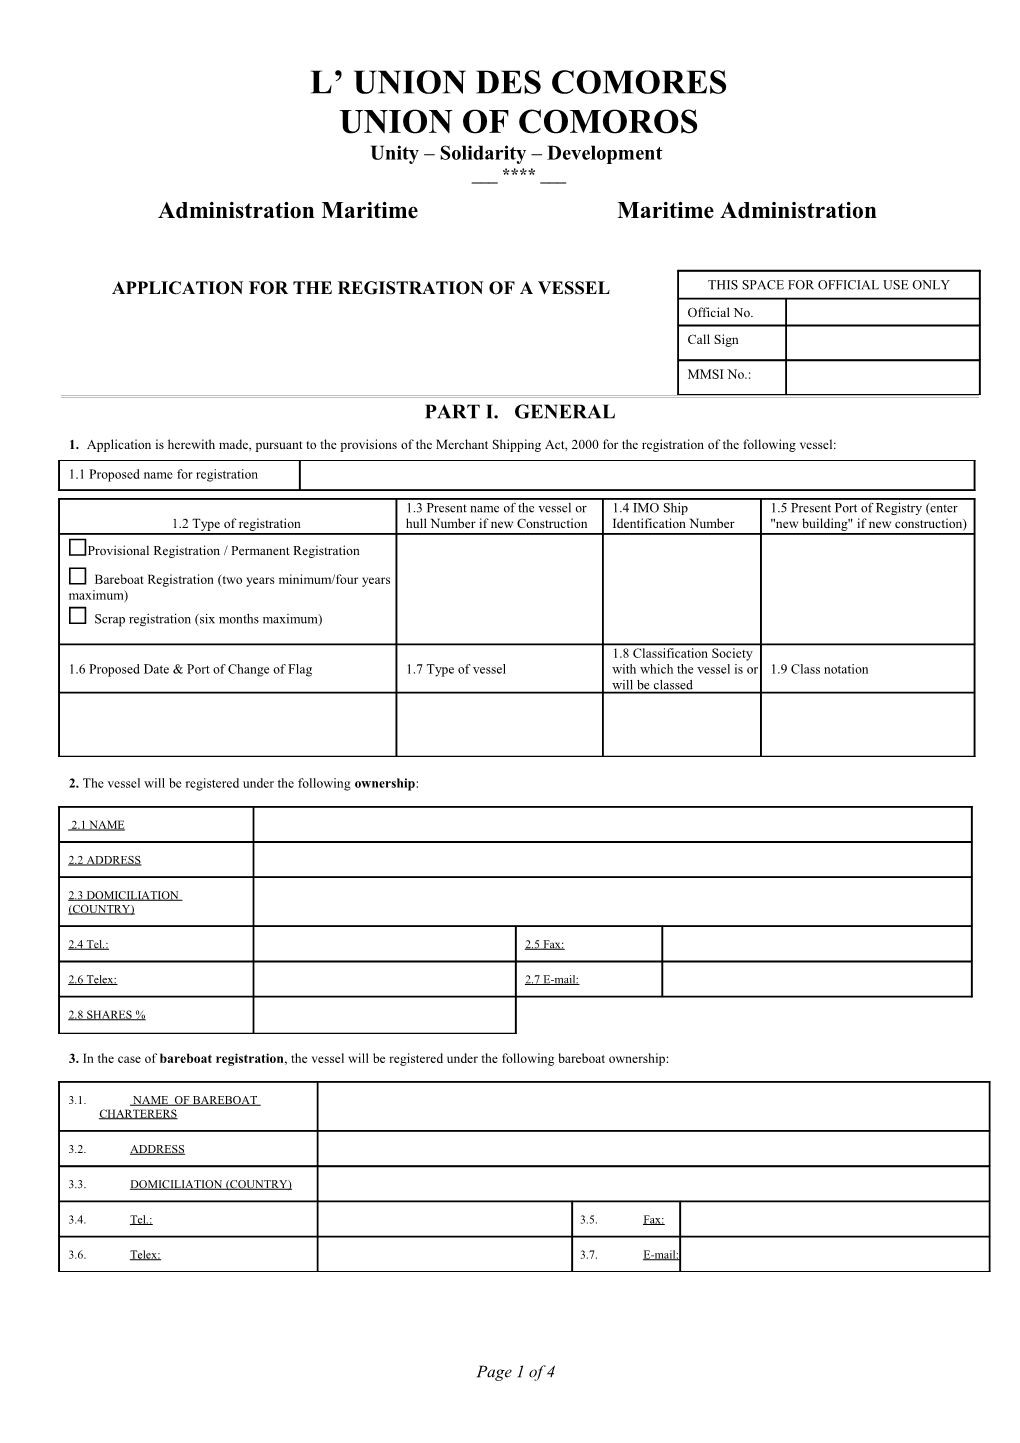 Application for the Registration of a Vessel